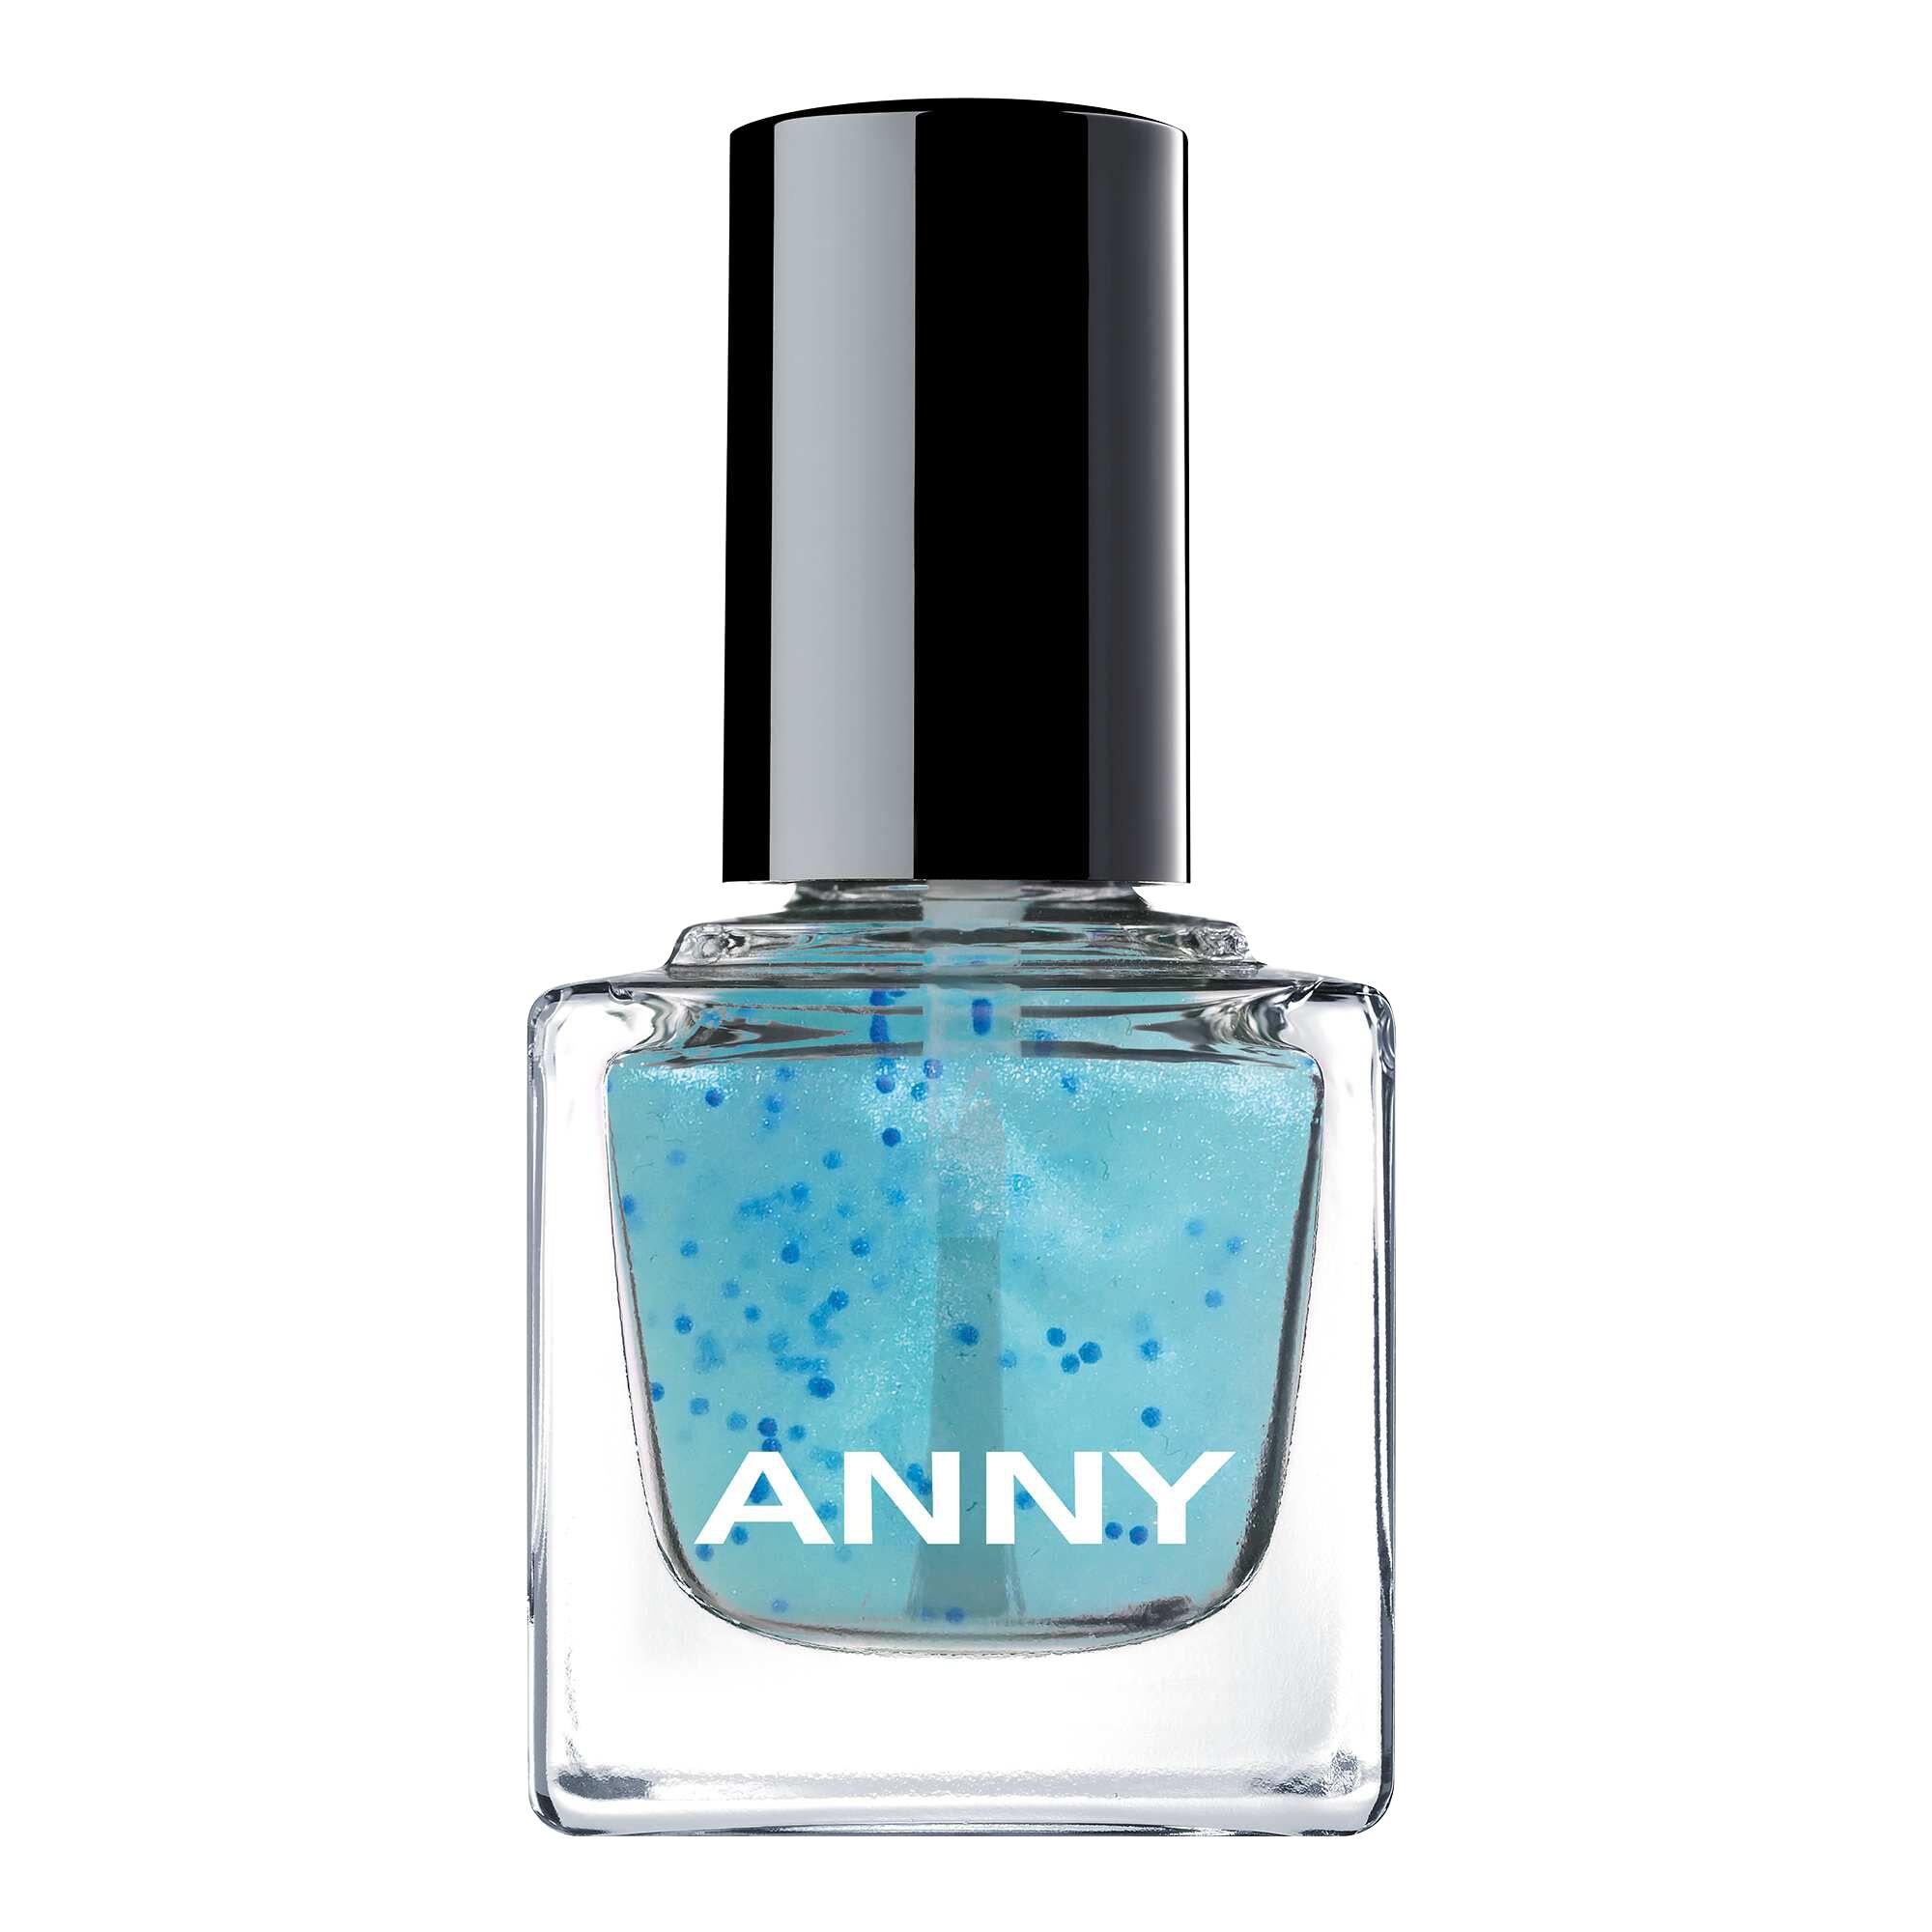 5 Minute Treatment Probiotic Defender ANNY Multifunctional nail care